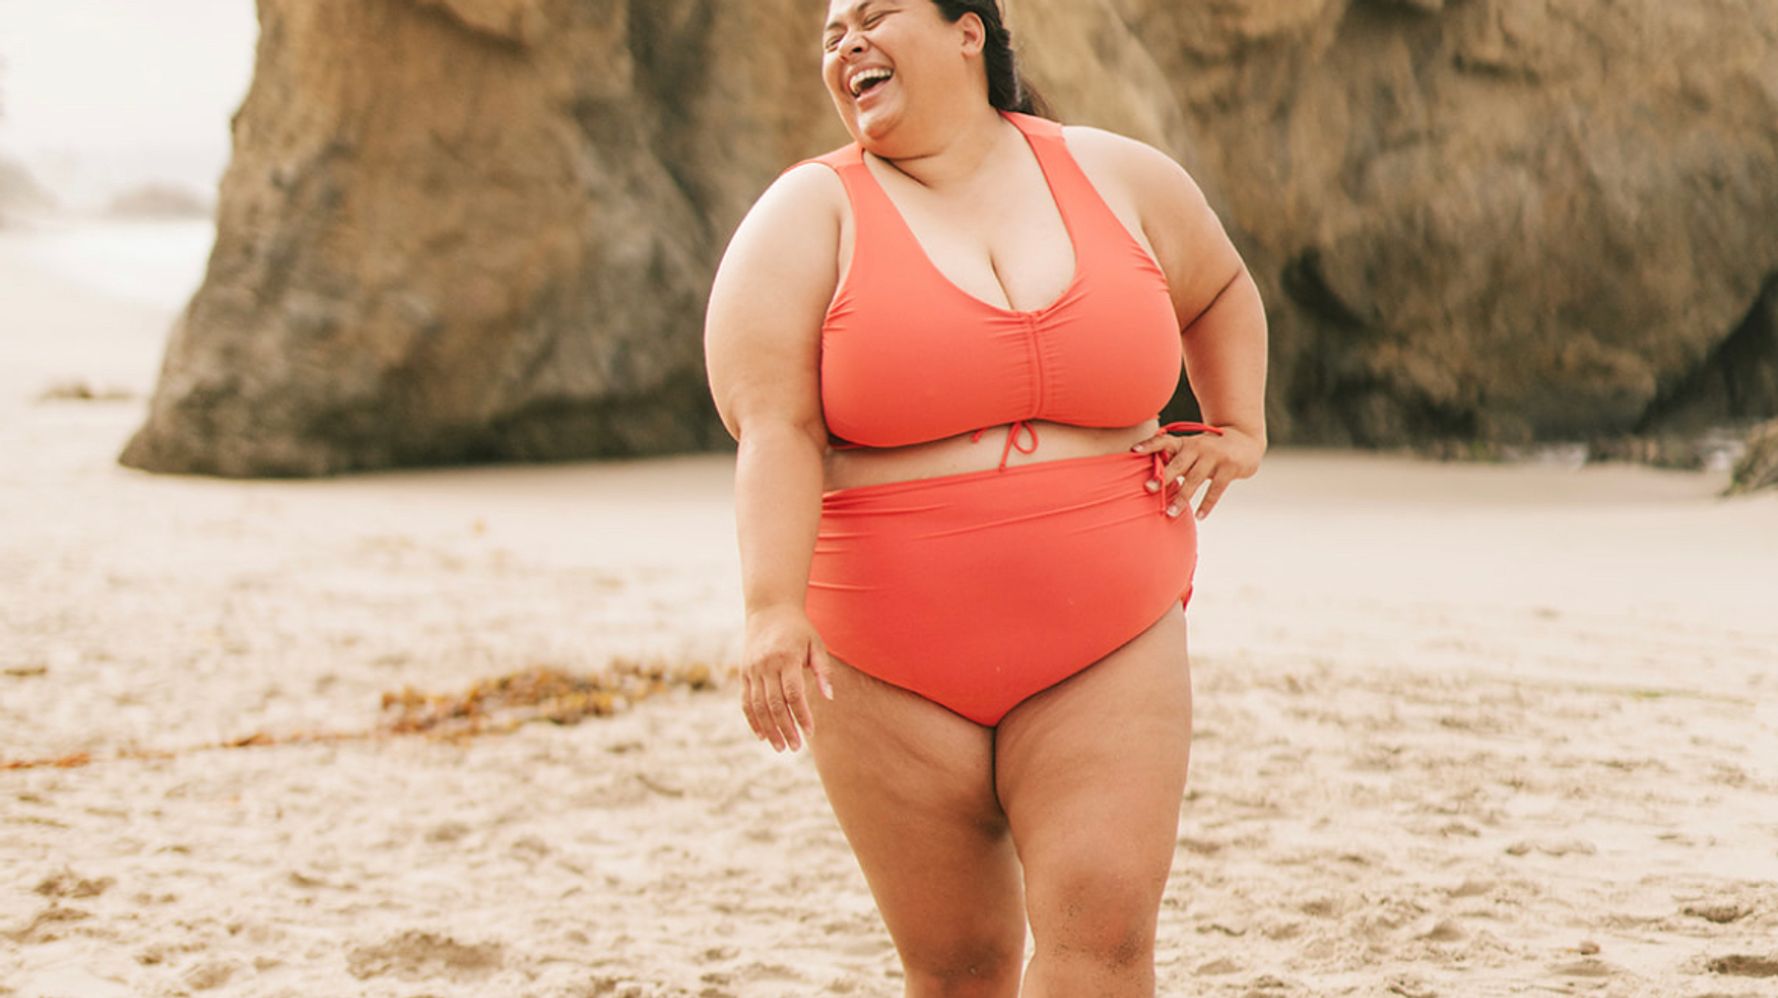 I Became A Bikini And Lingerie Model When I Was At My Highest Weight Ever |  HuffPost HuffPost Personal